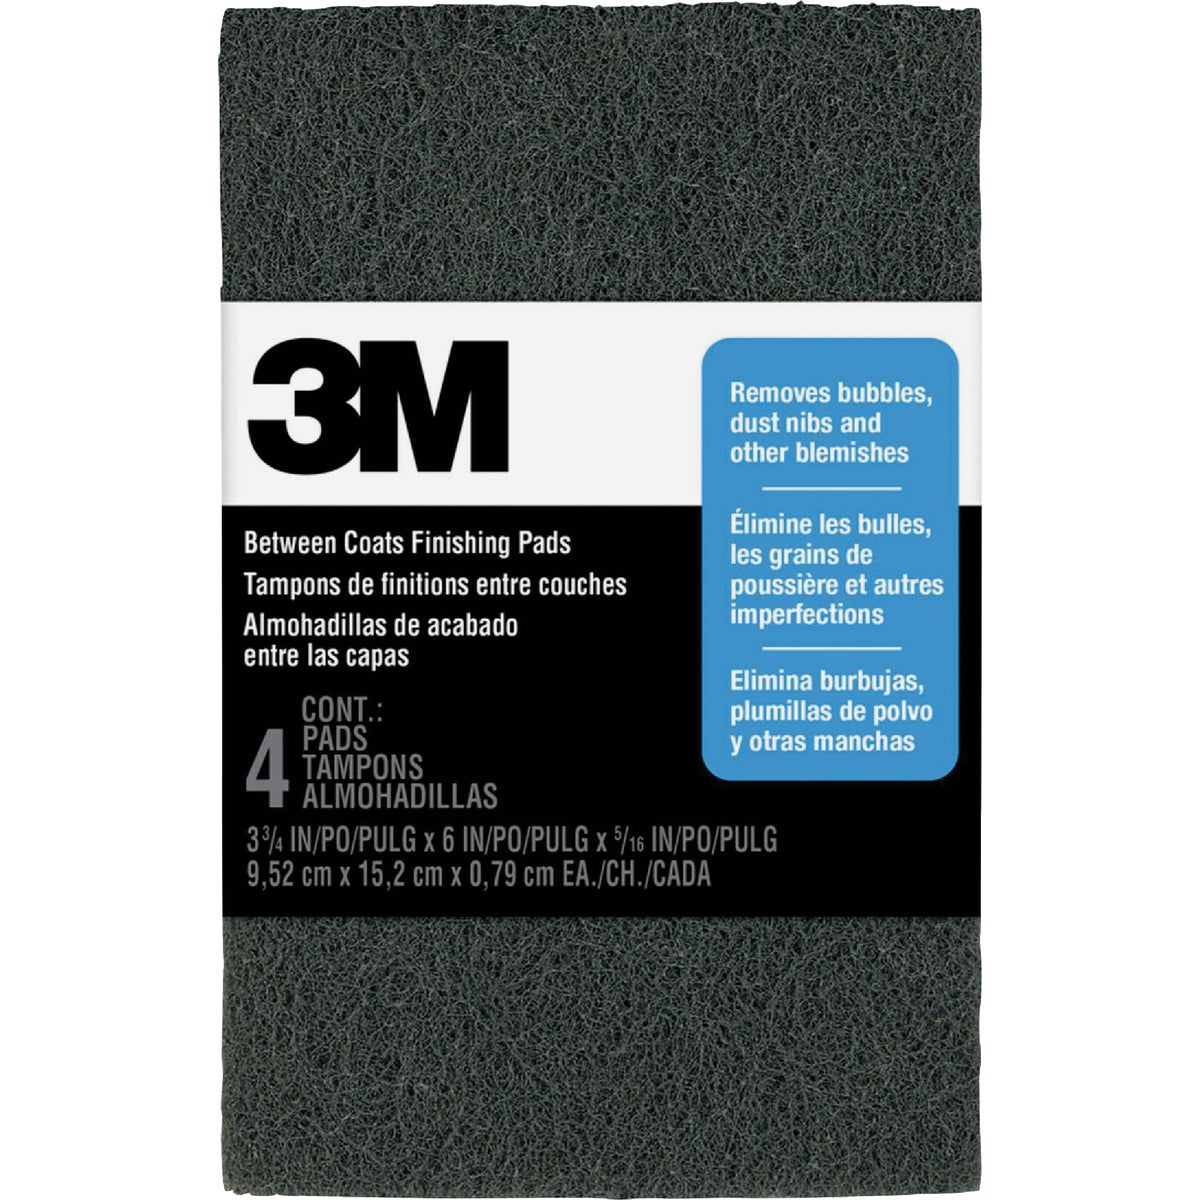 3M 3-7/8 In. x 6 In. Finishing Pad (2-Pack)